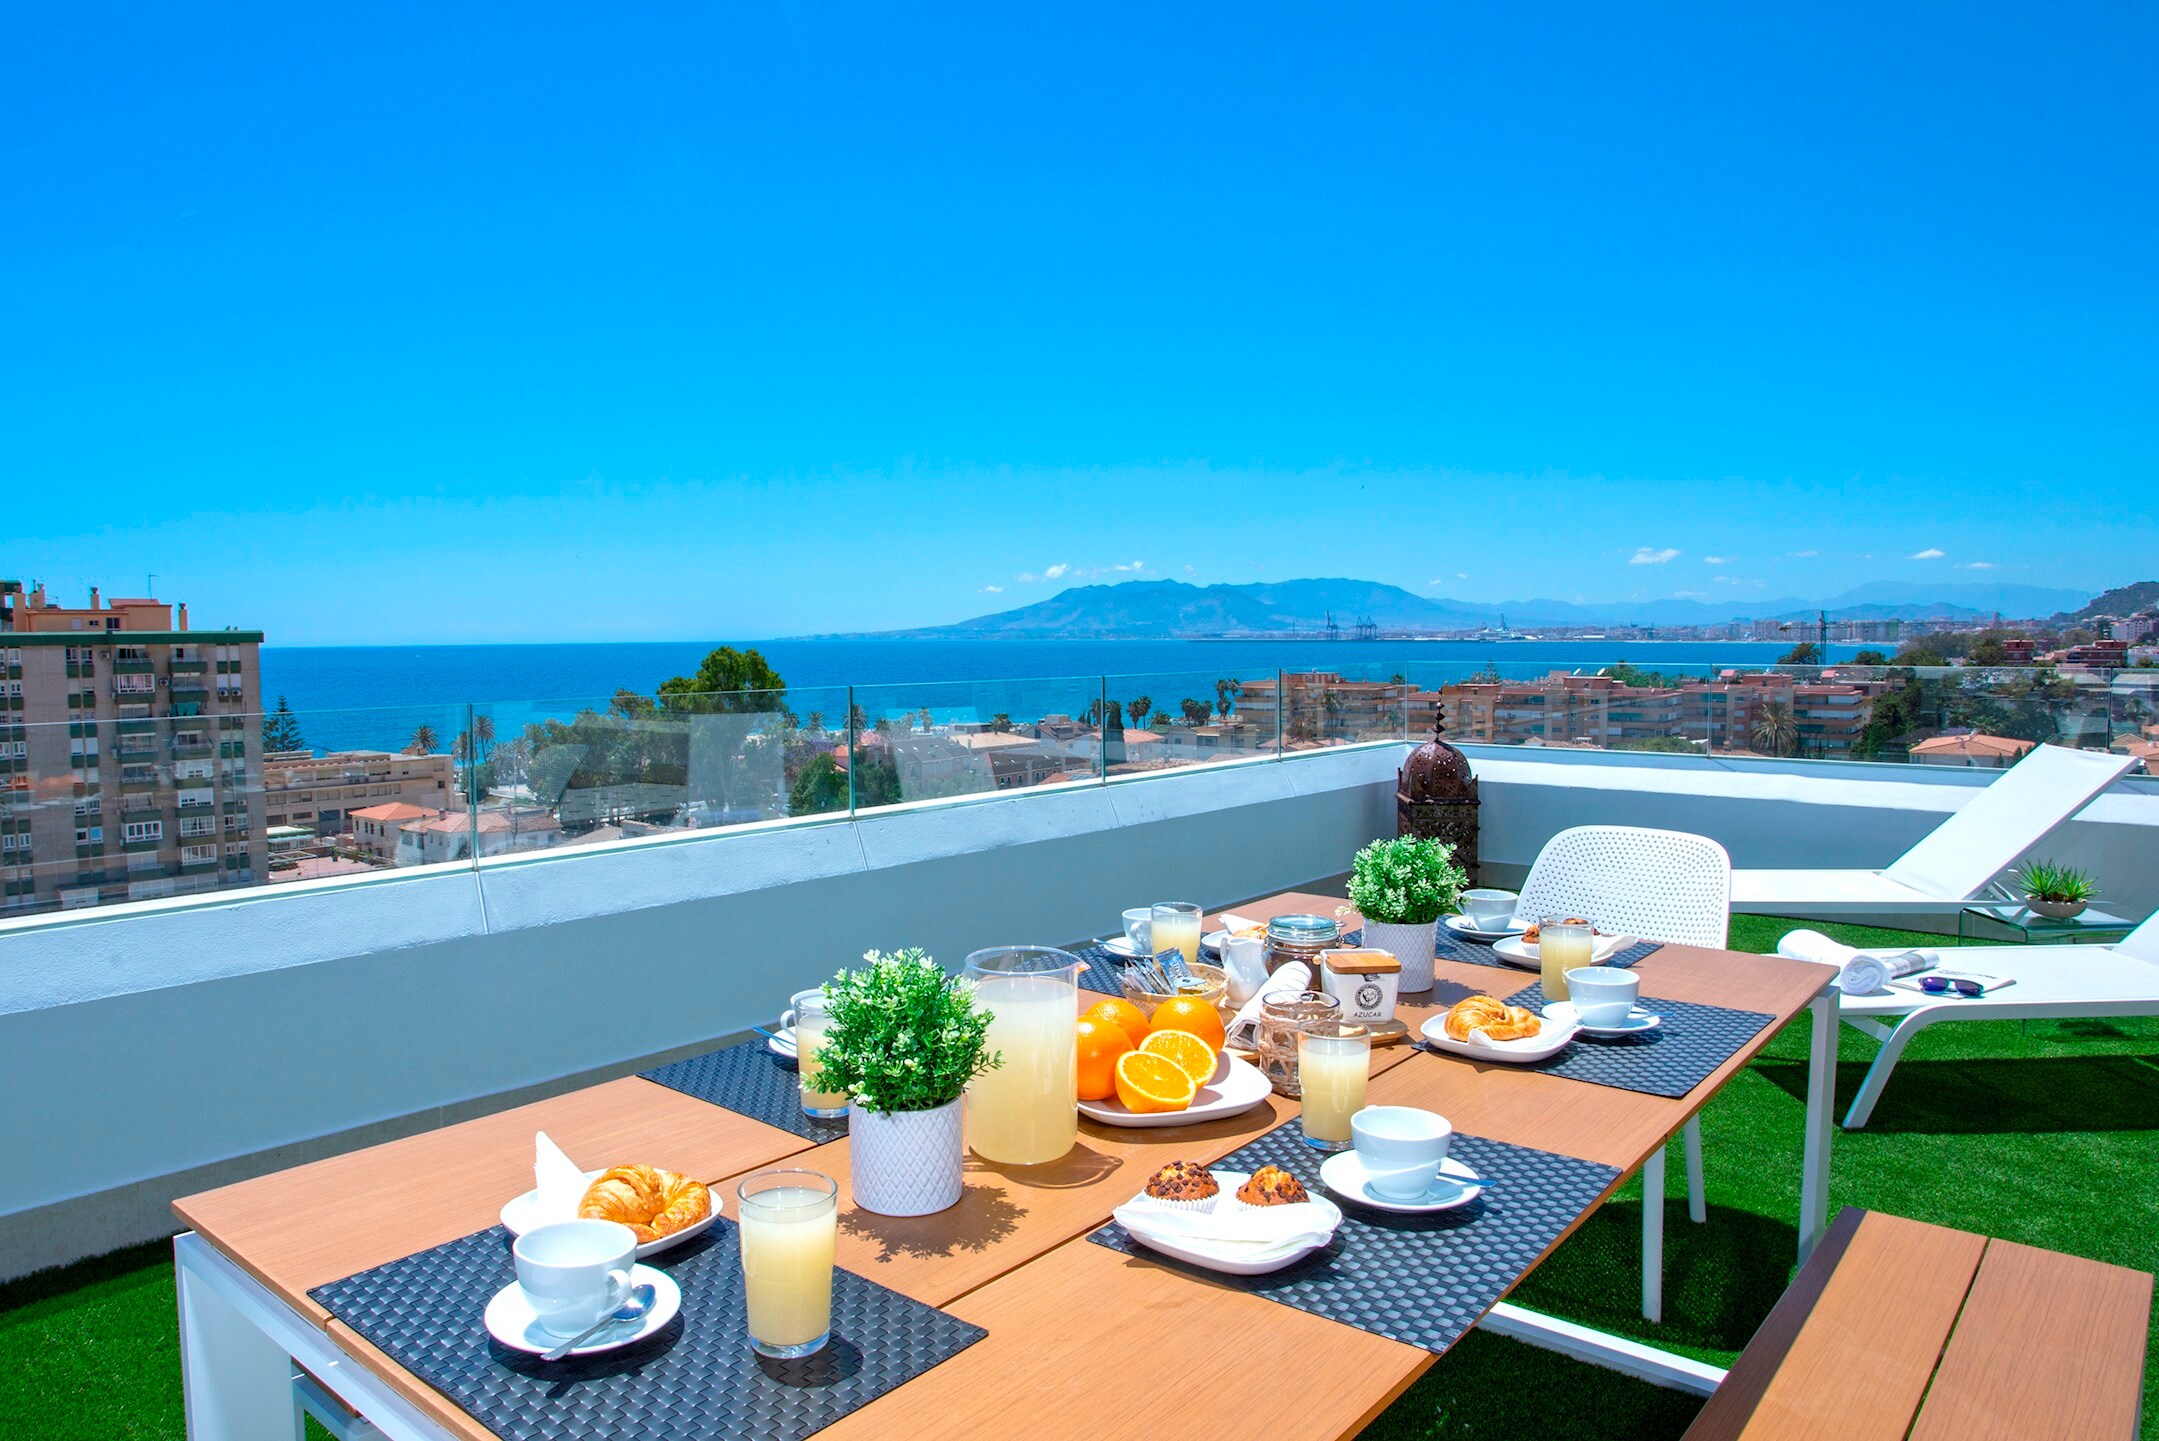 Property Image 2 - Great penthouse next to the beach. Elcano Terrace